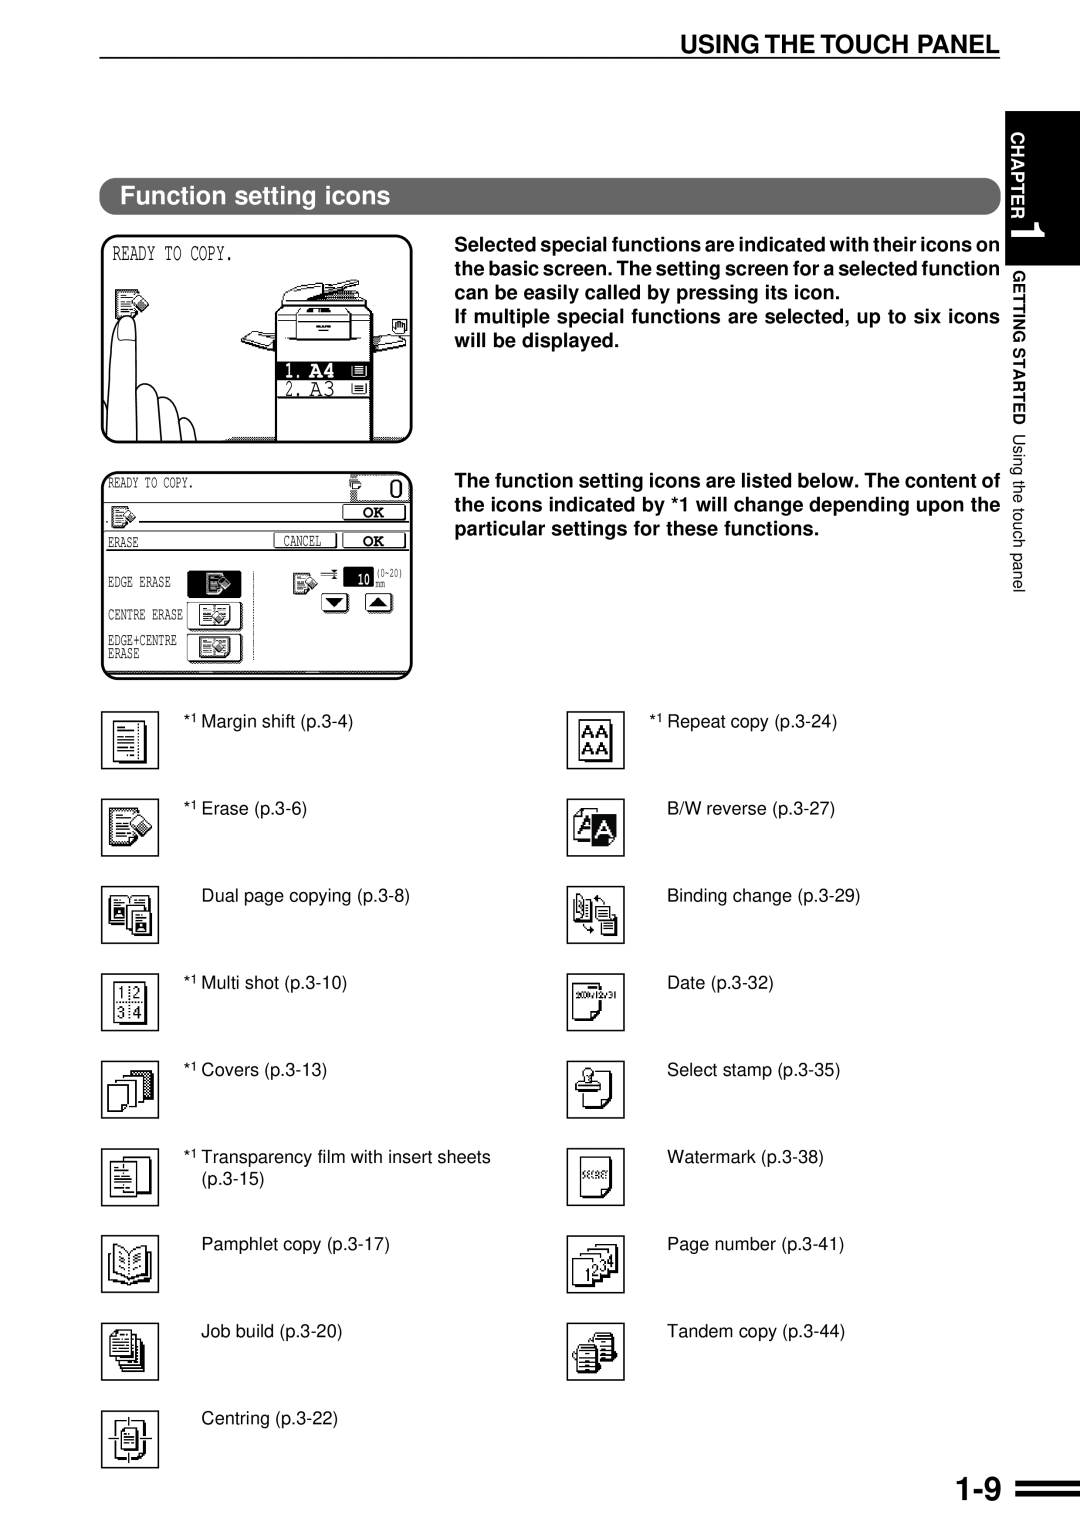 Sharp AR-507 operation manual Function setting icons, Using The Touch Panel, Ready To Copy, 1. A4, 2. A3, will be displayed 